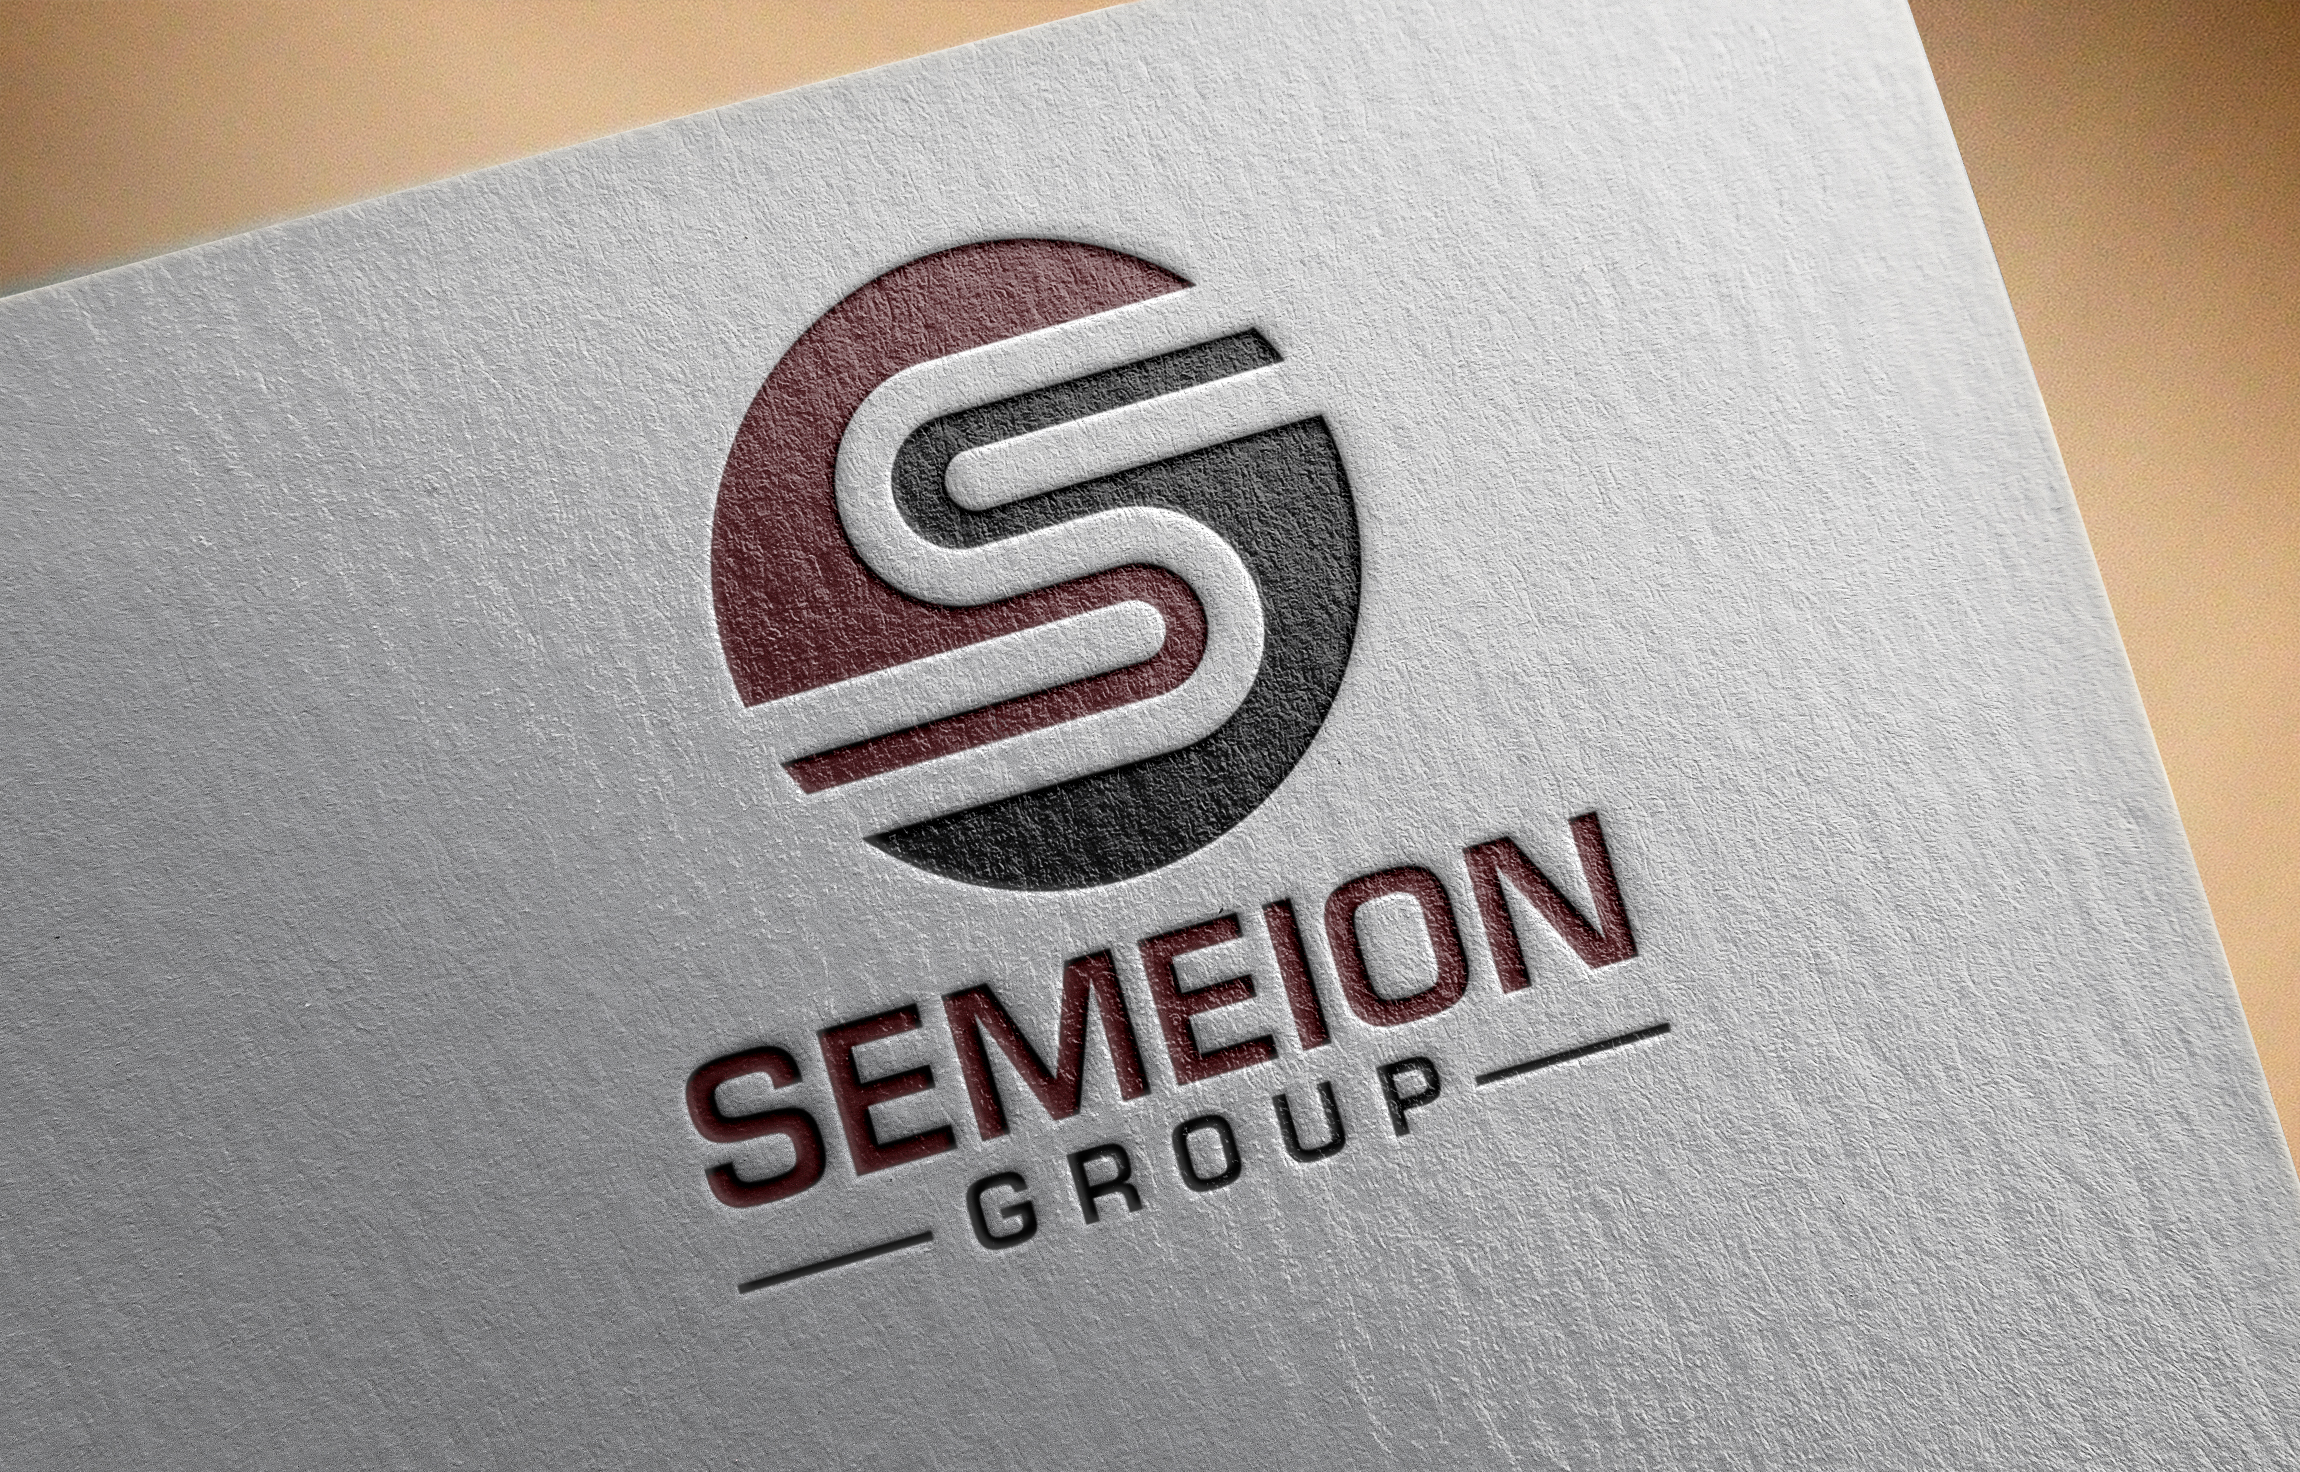 Semeion Group Logo printed on paper